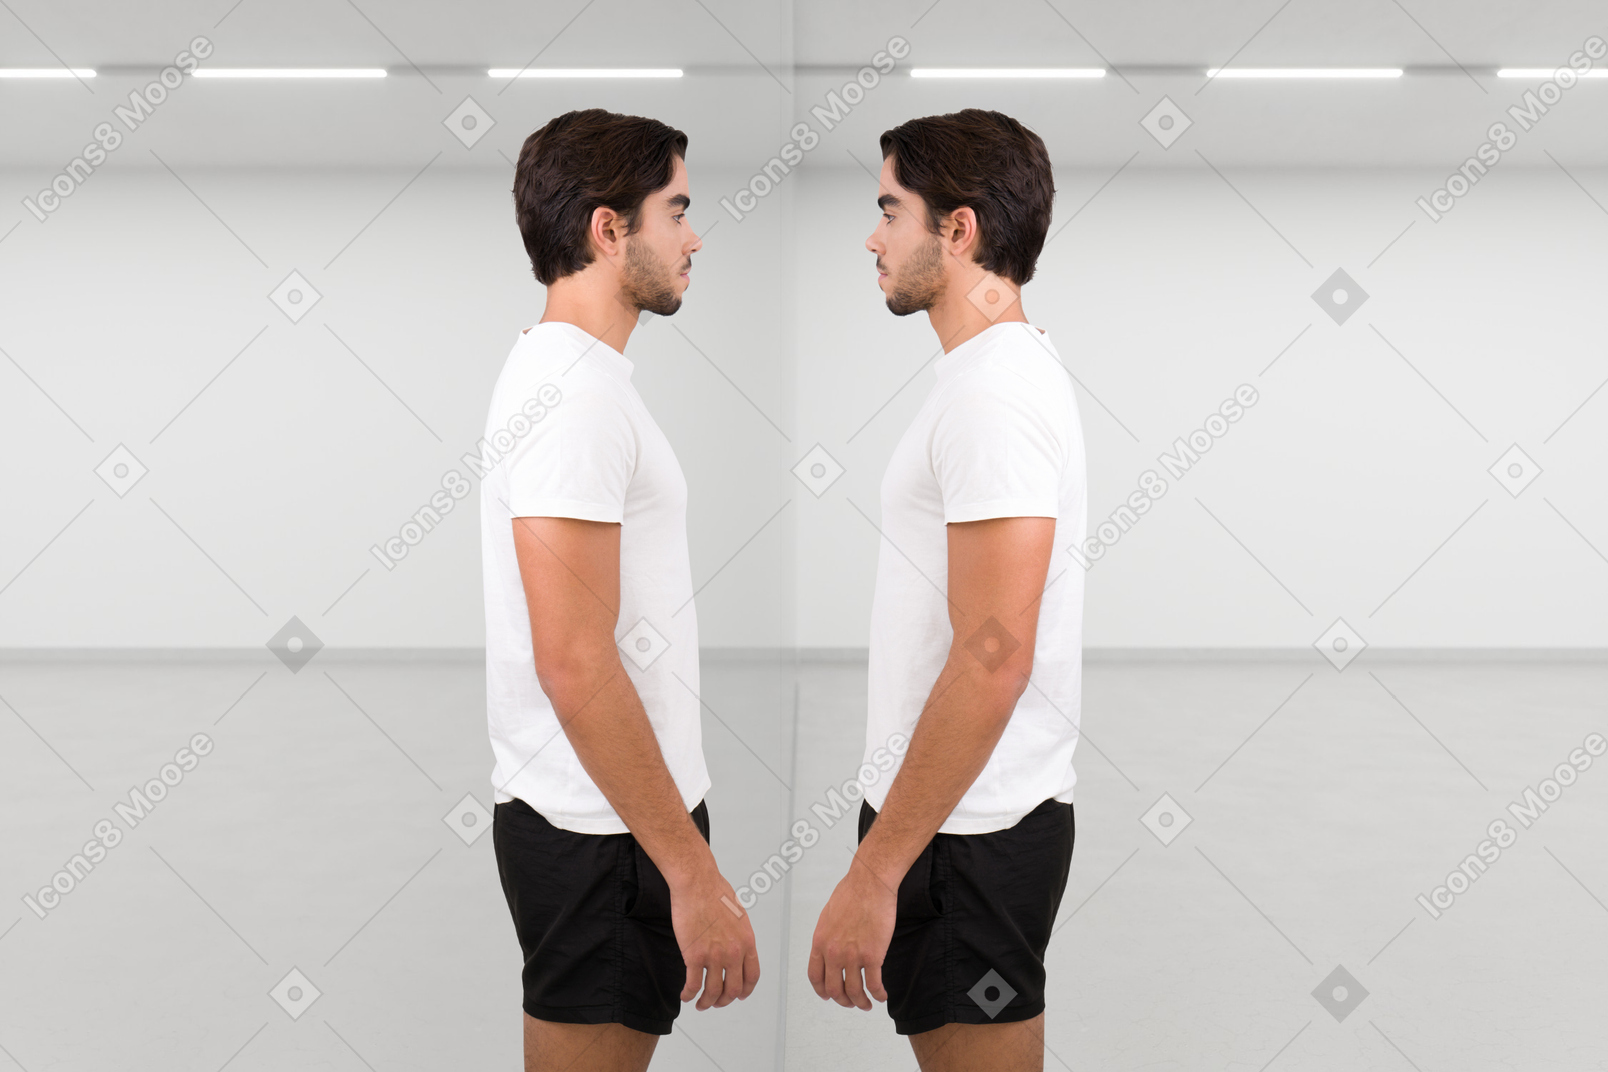 A pensive young man standing in front of his reflection